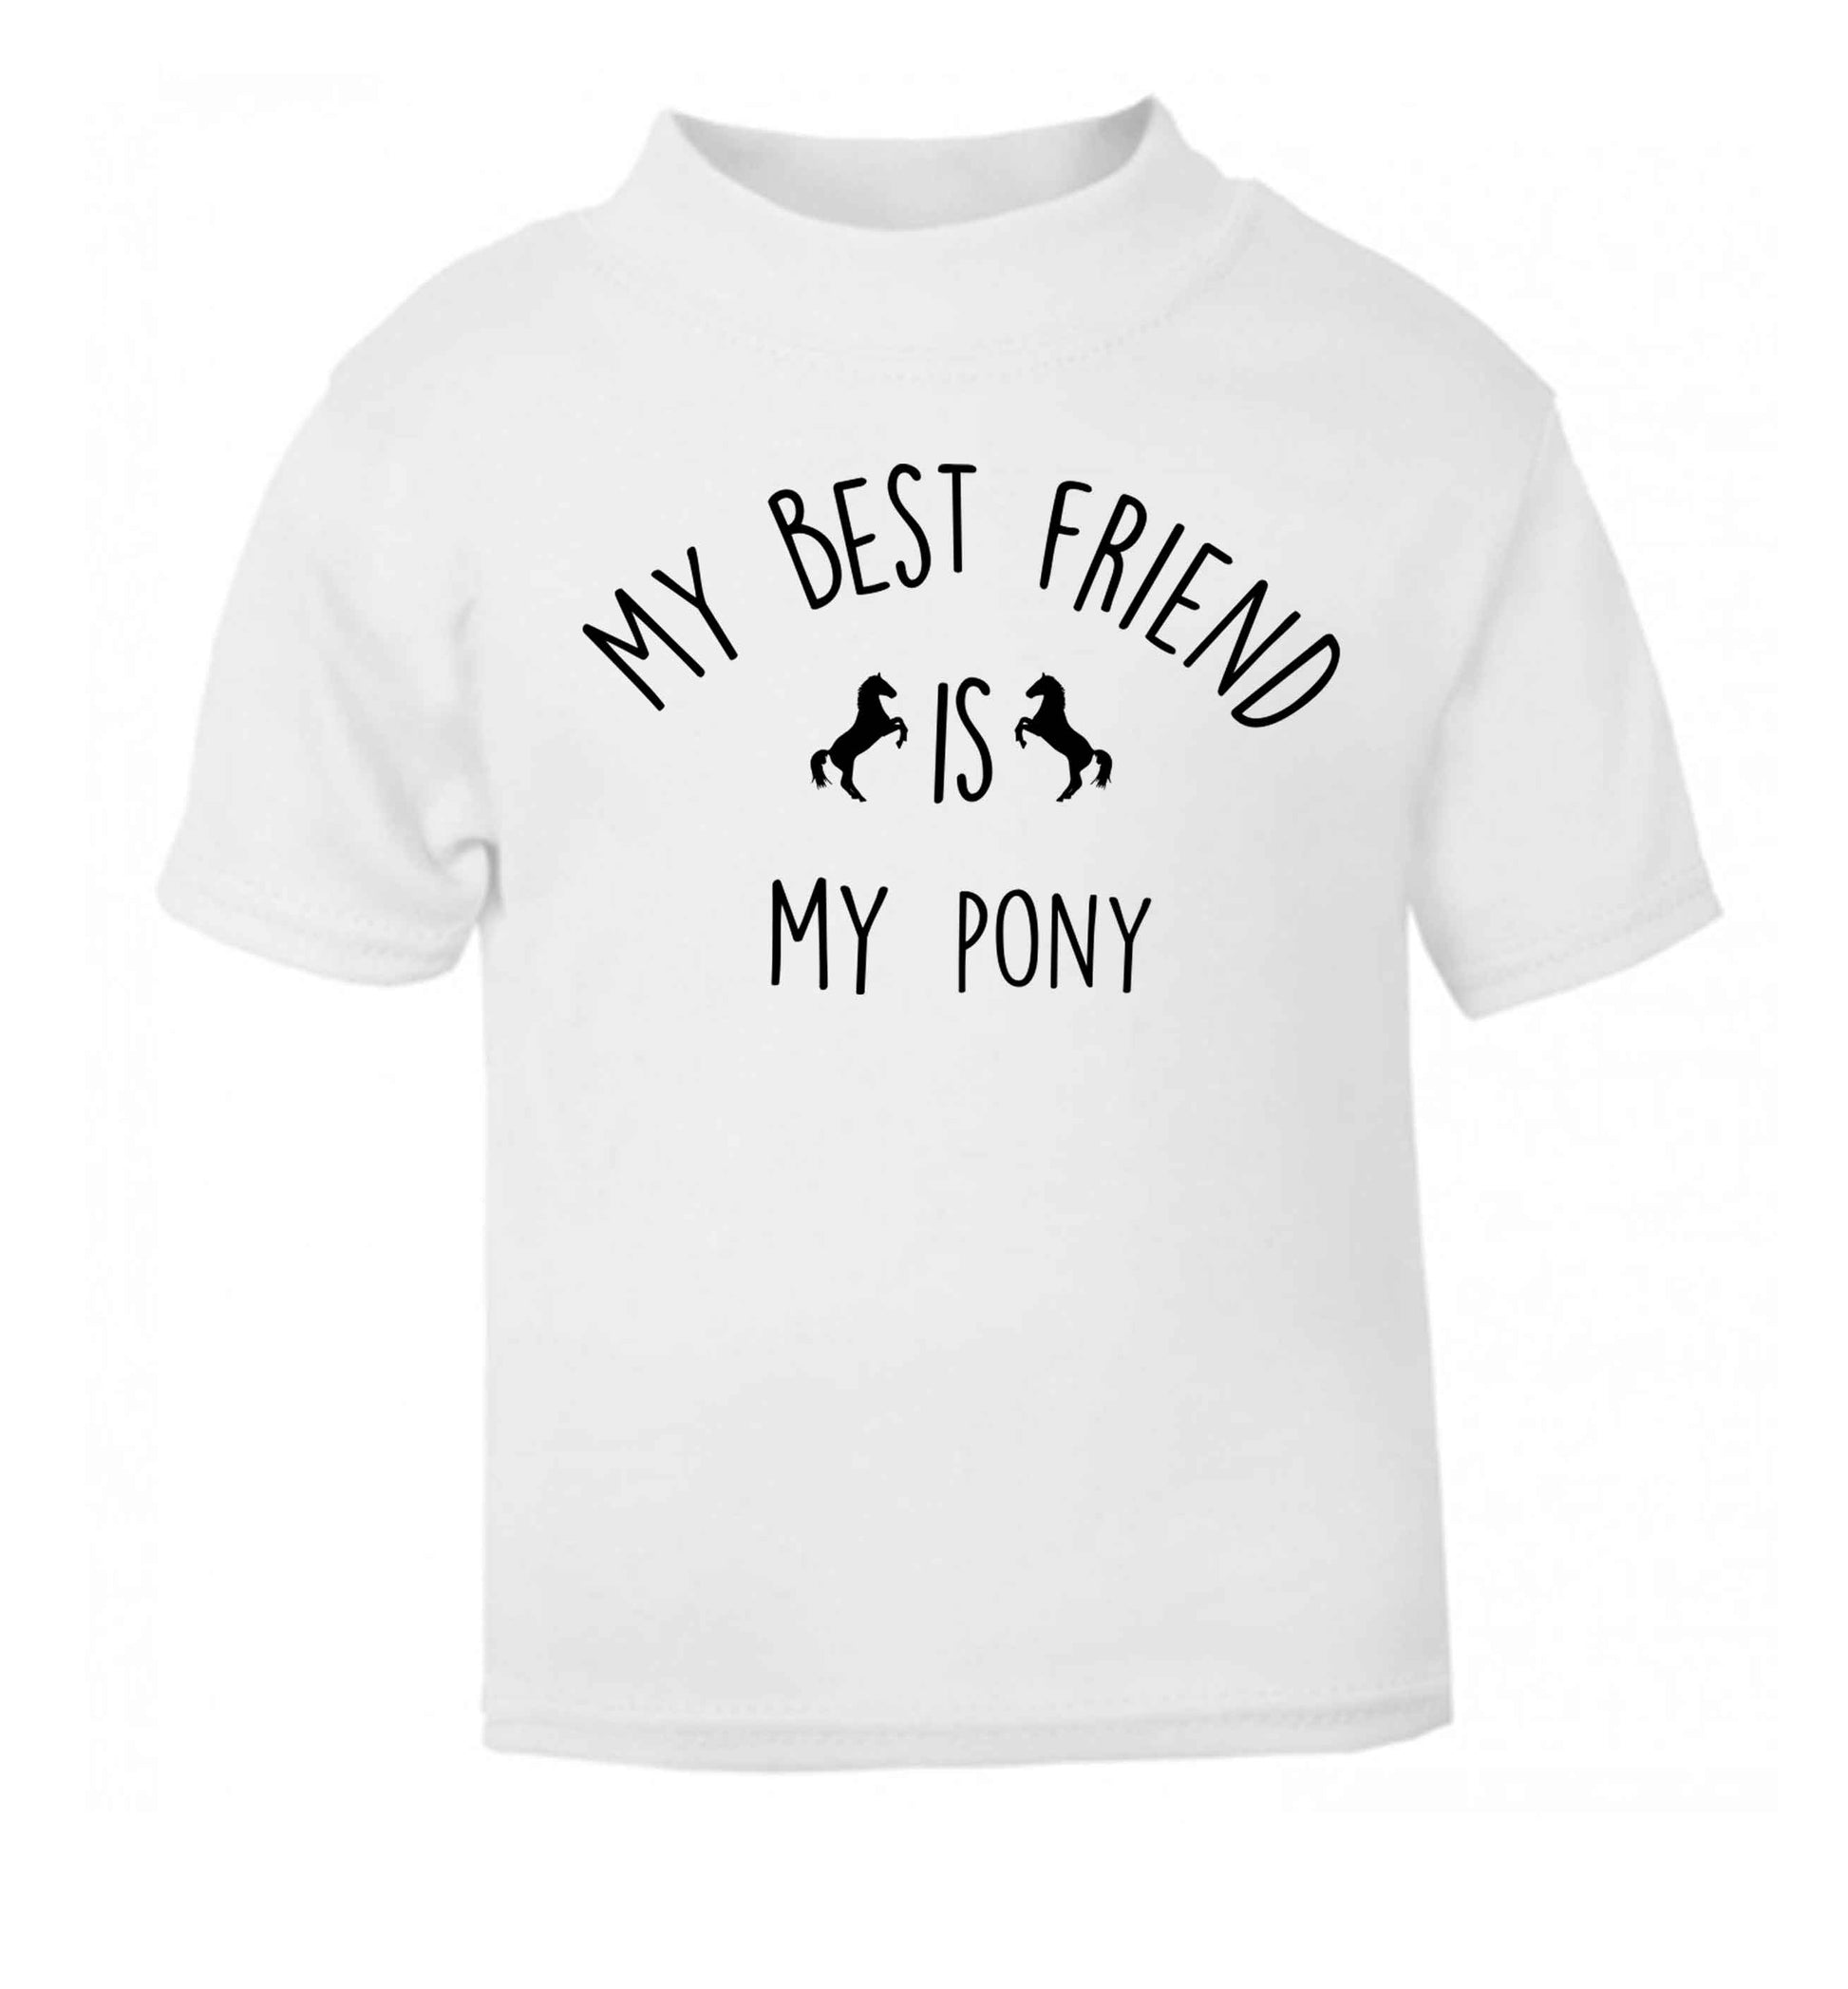 My best friend is my pony white baby toddler Tshirt 2 Years